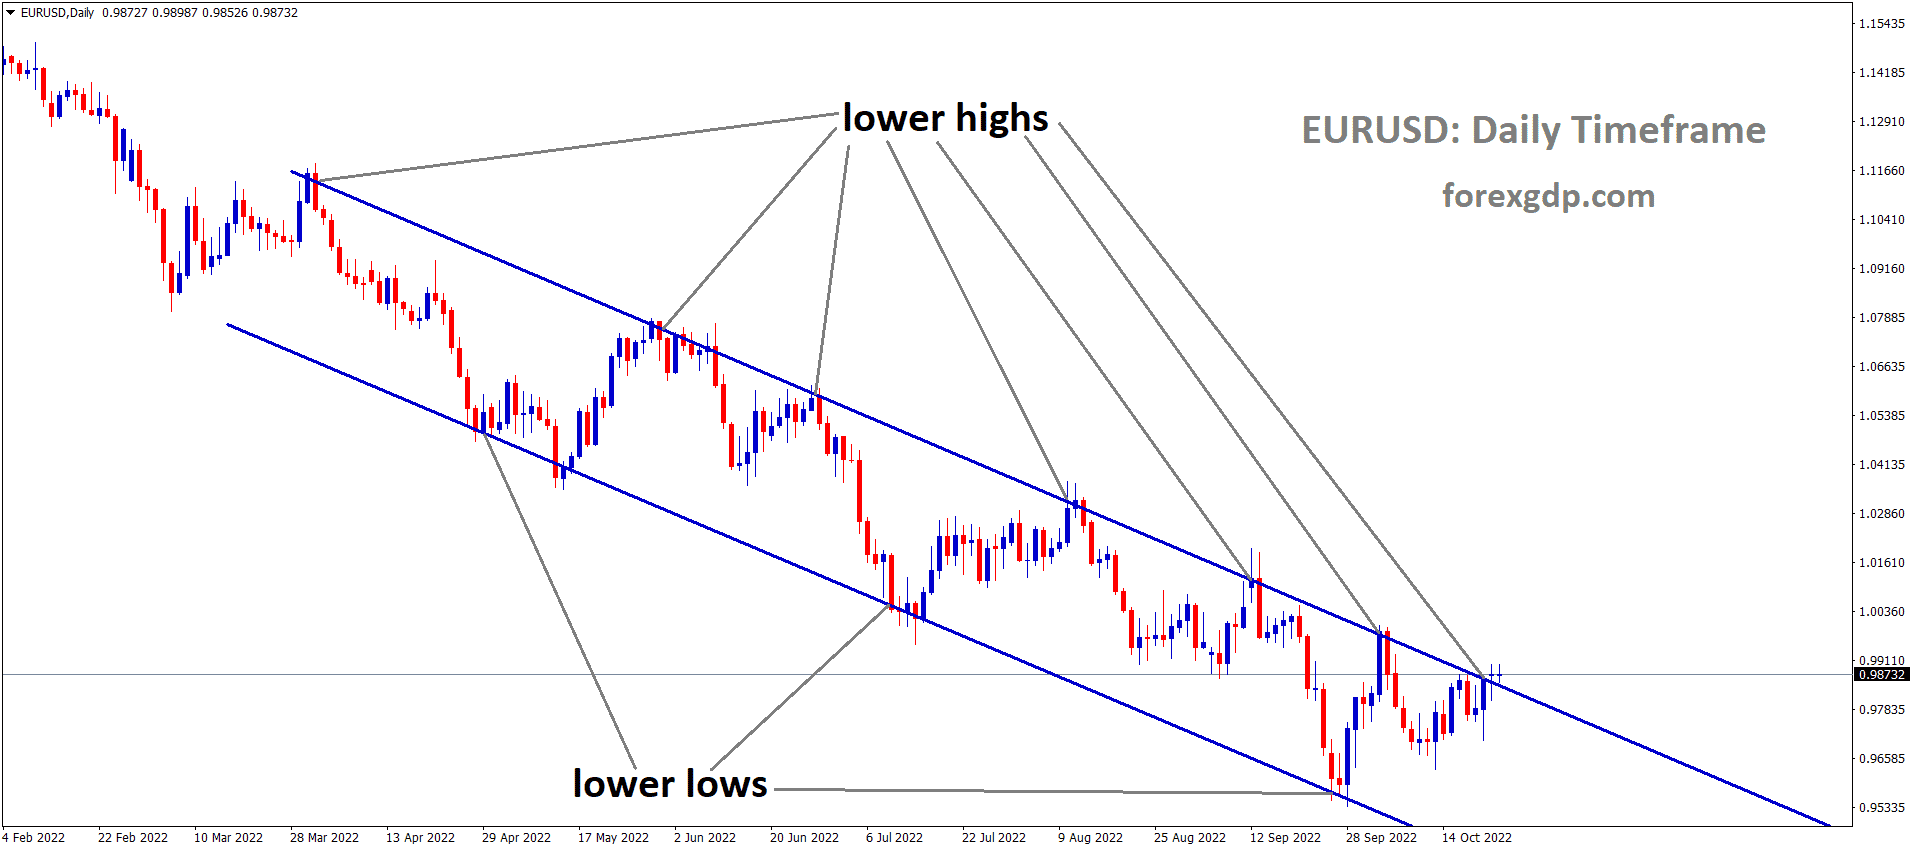 EURUSD is moving in the Descending channel and the market has reached the lower high area of the channel 5